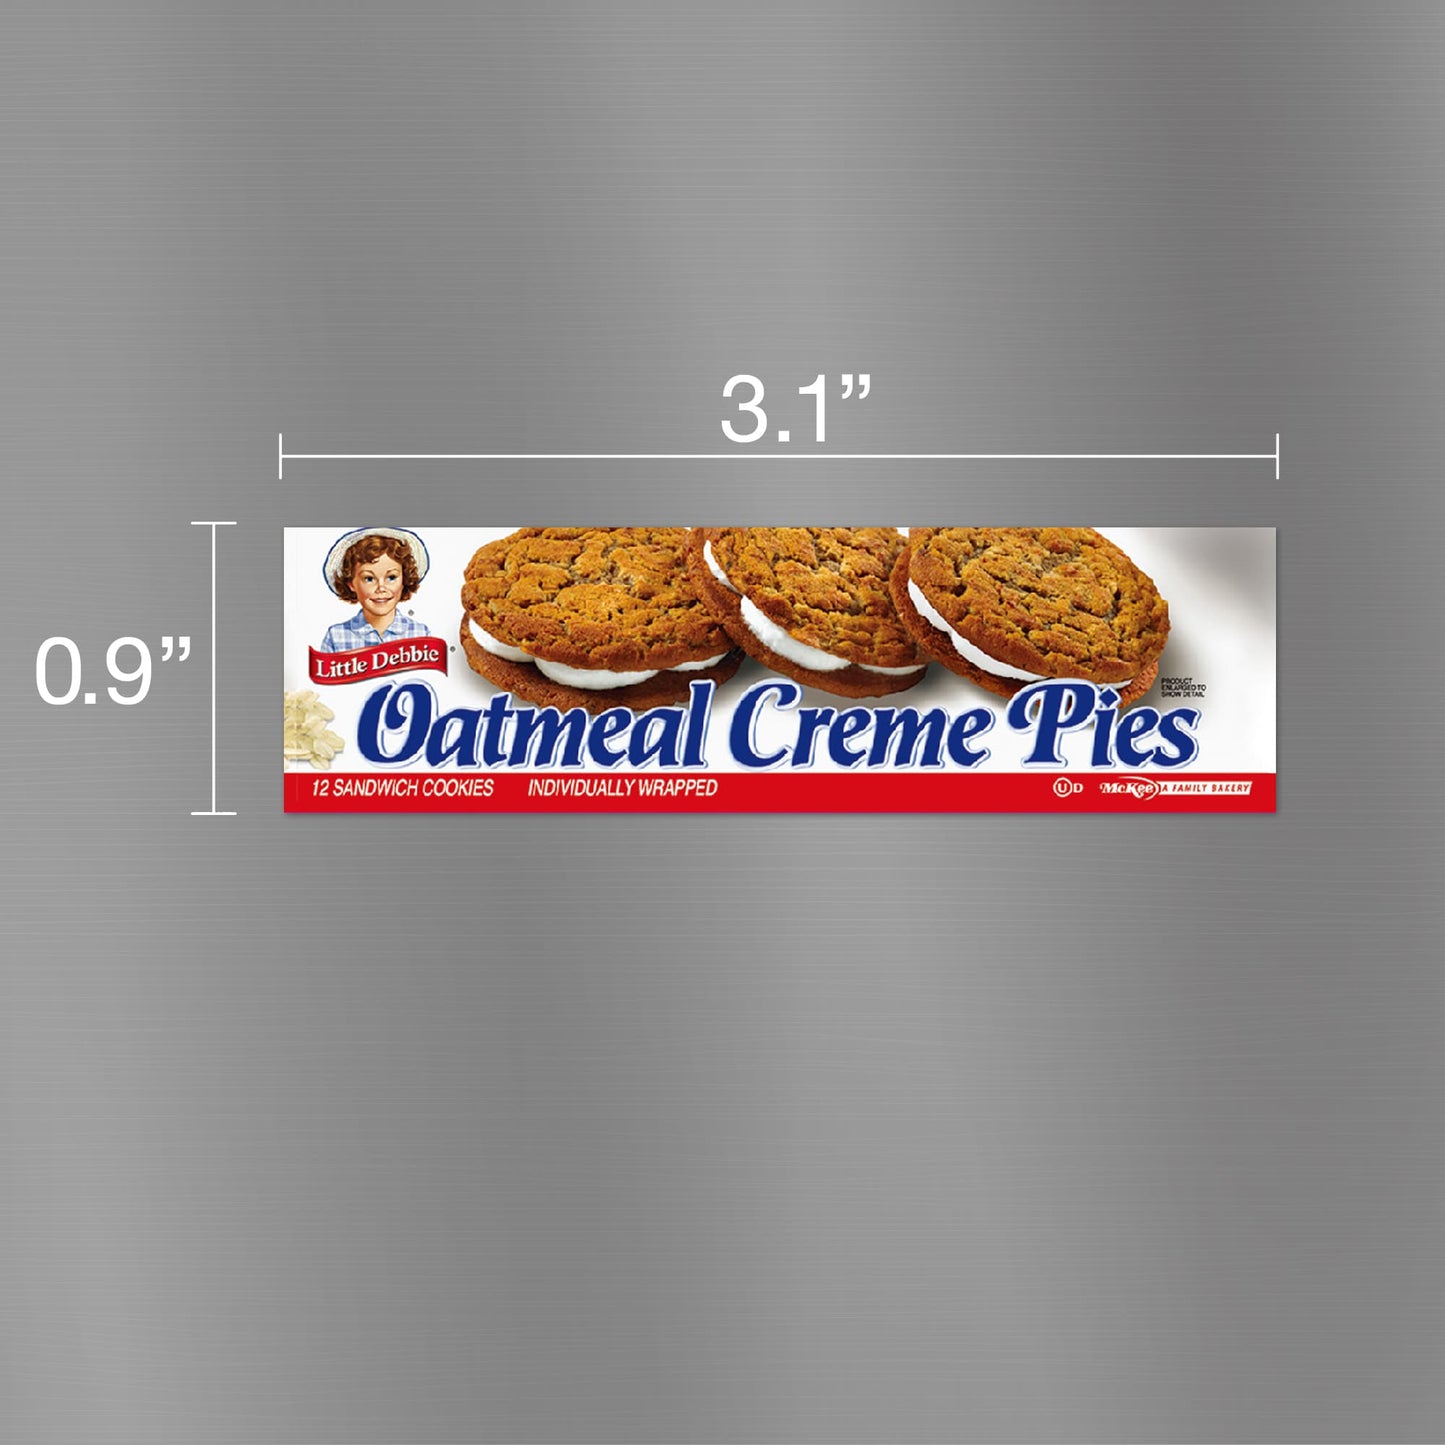 Image of a Little Debbie Oatmeal Creme Pies carton magnet, measuring 3.1 inches wide and 0.9 inches tall. The magnet features a clean silver background with images of three oatmeal creme pies and the iconic Little Debbie logo at the top left corner. The text 'Oatmeal Creme Pies' is prominently displayed in blue and red, indicating the product contains 12 sandwich cookies, individually wrapped.